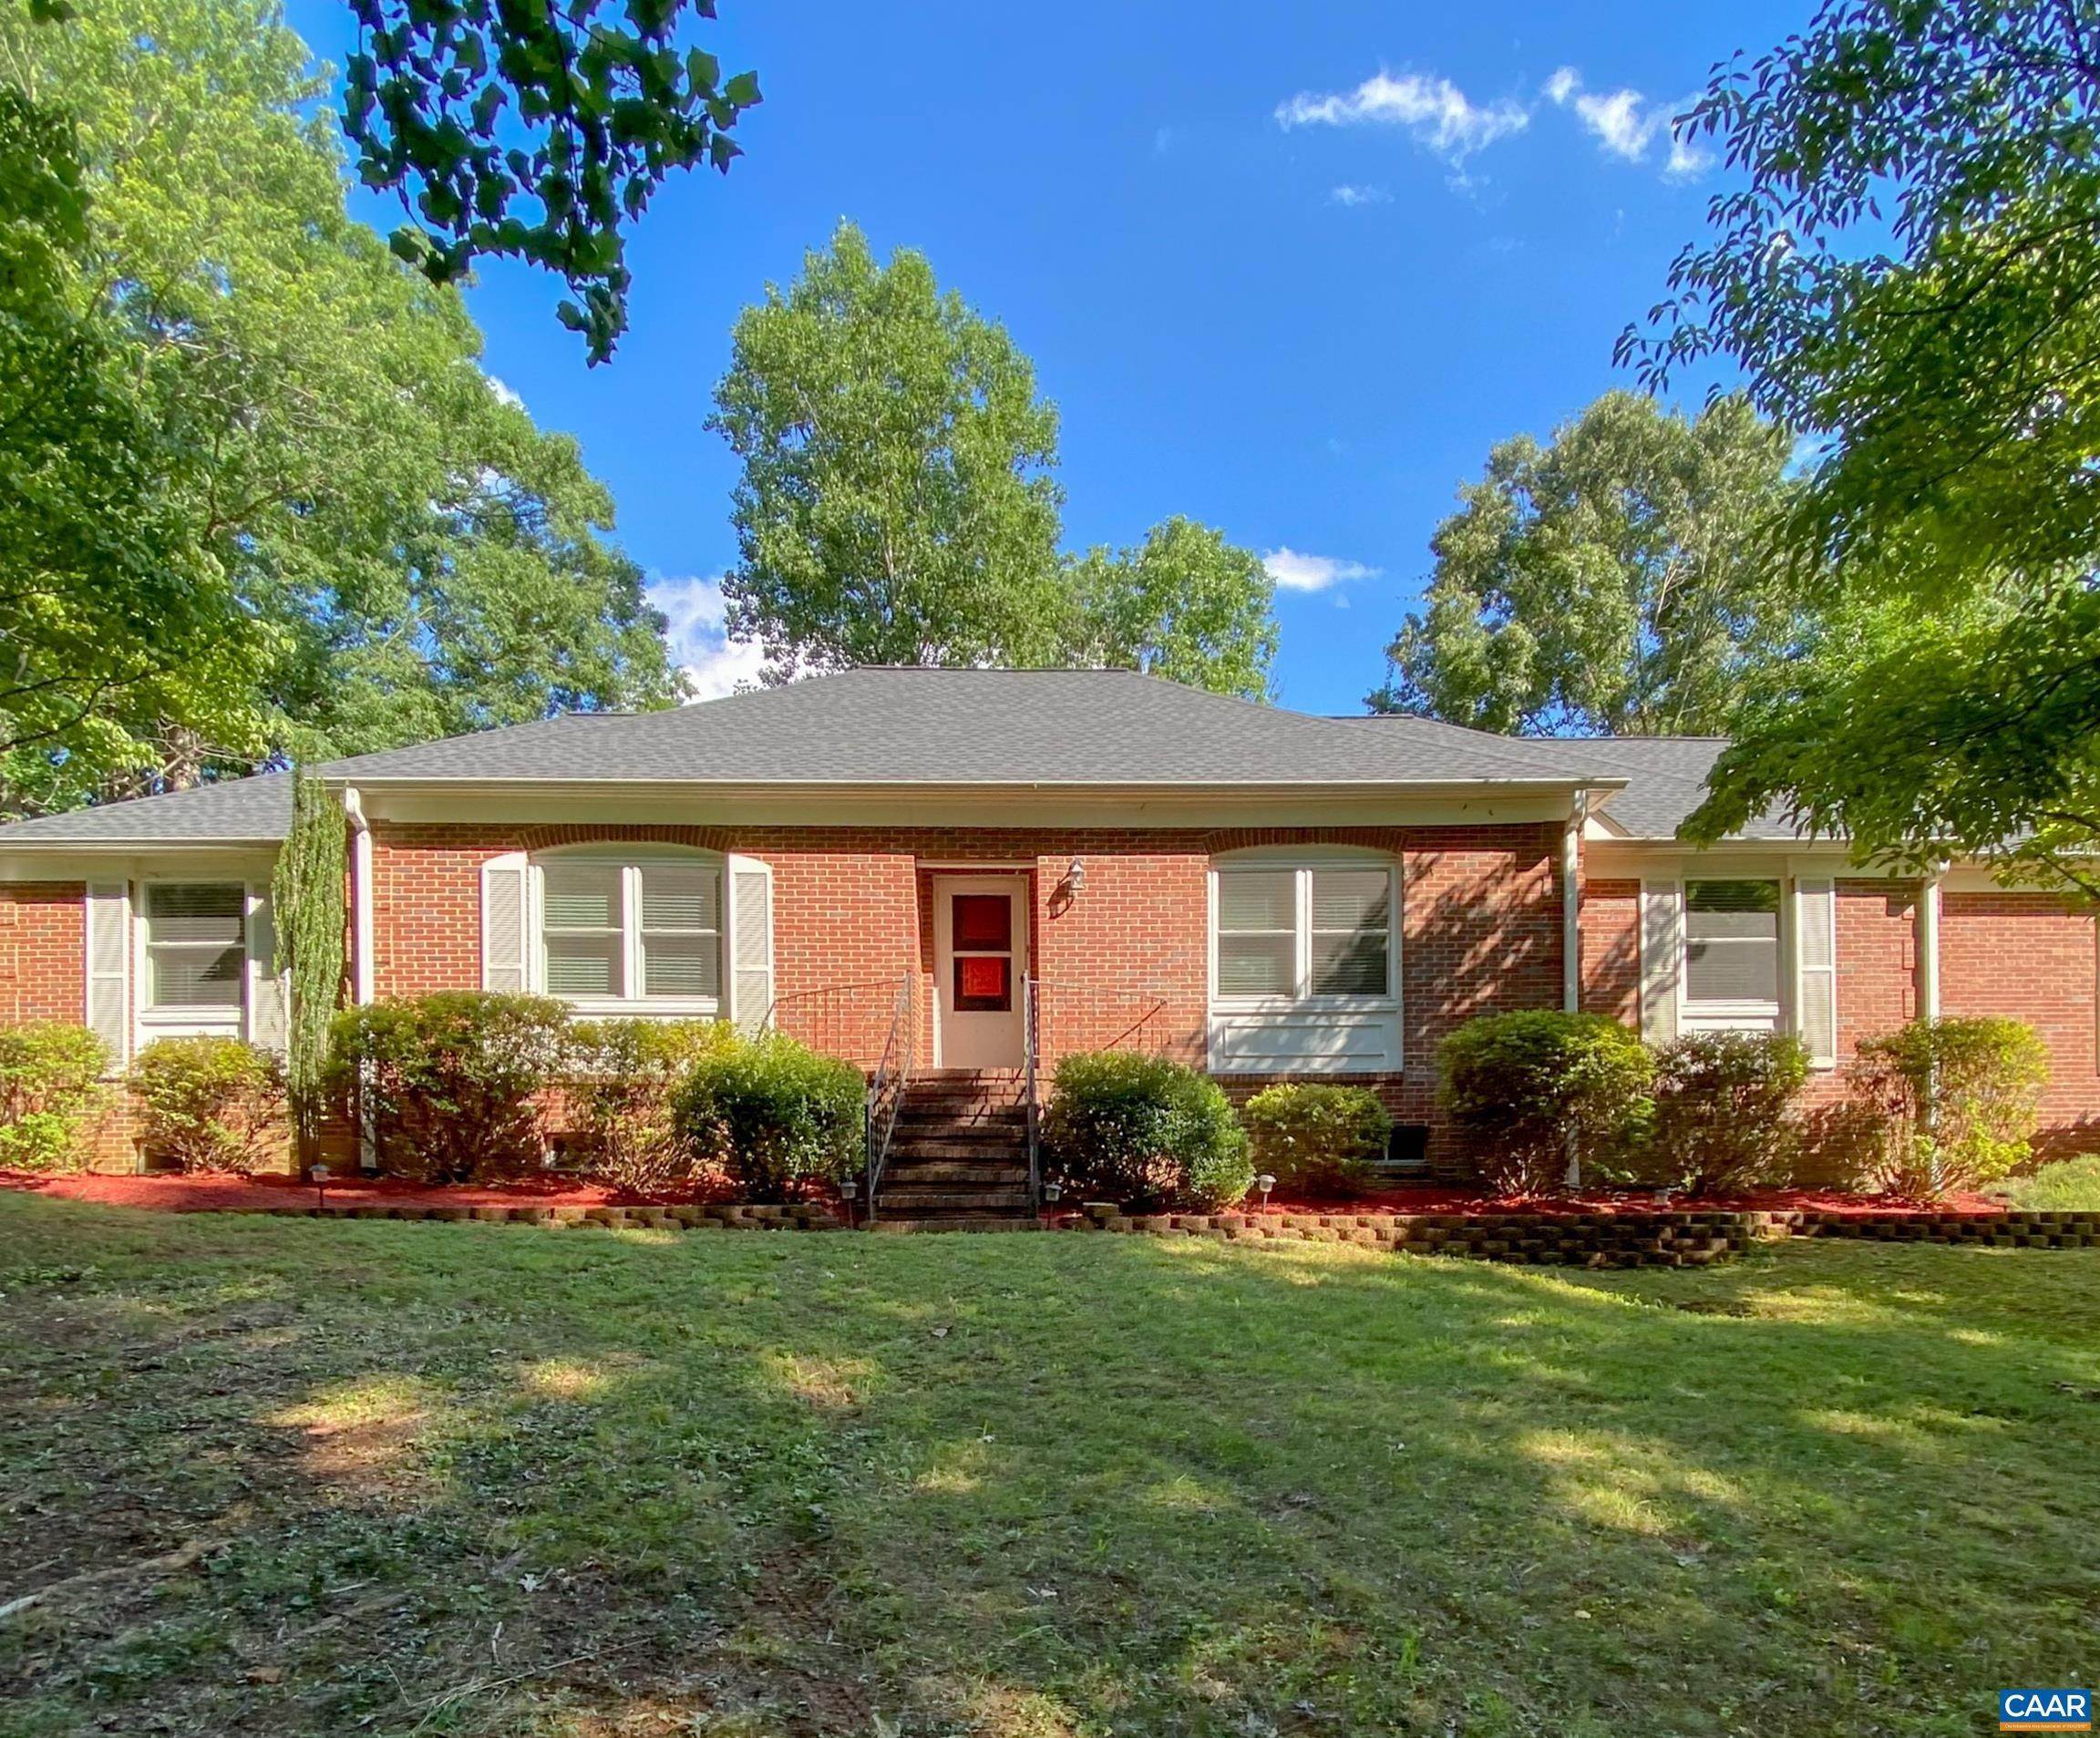 46. Single Family Homes for Sale at 855 CHAPEL HILL Road Charlottesville, Virginia 22901 United States